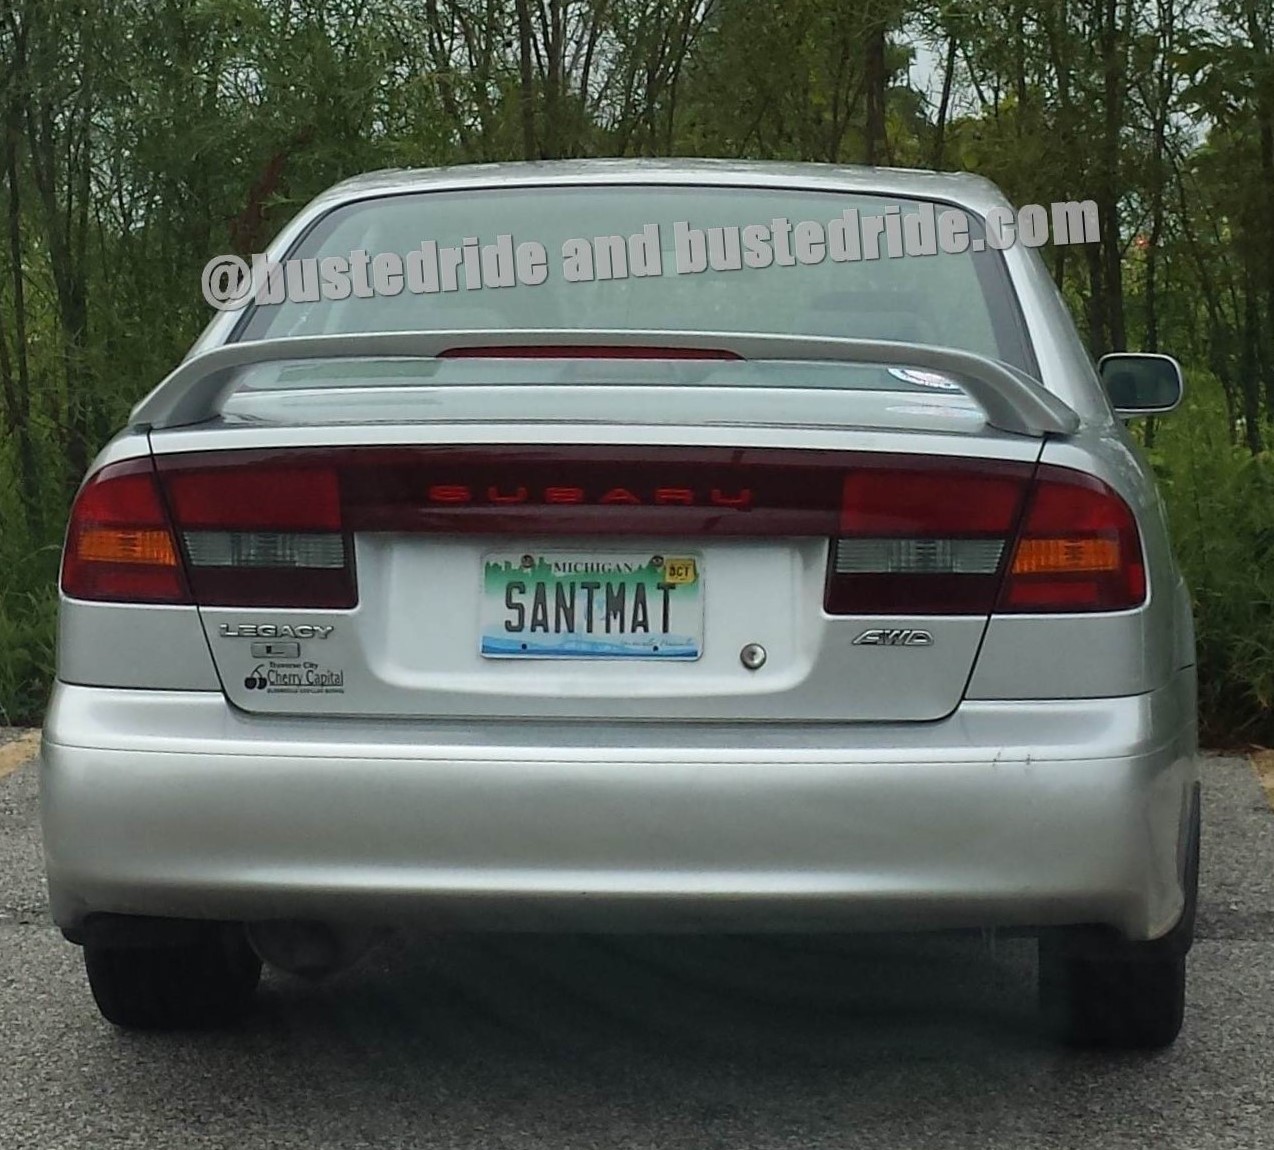 SANTMAT - Vanity License Plate by Busted Ride